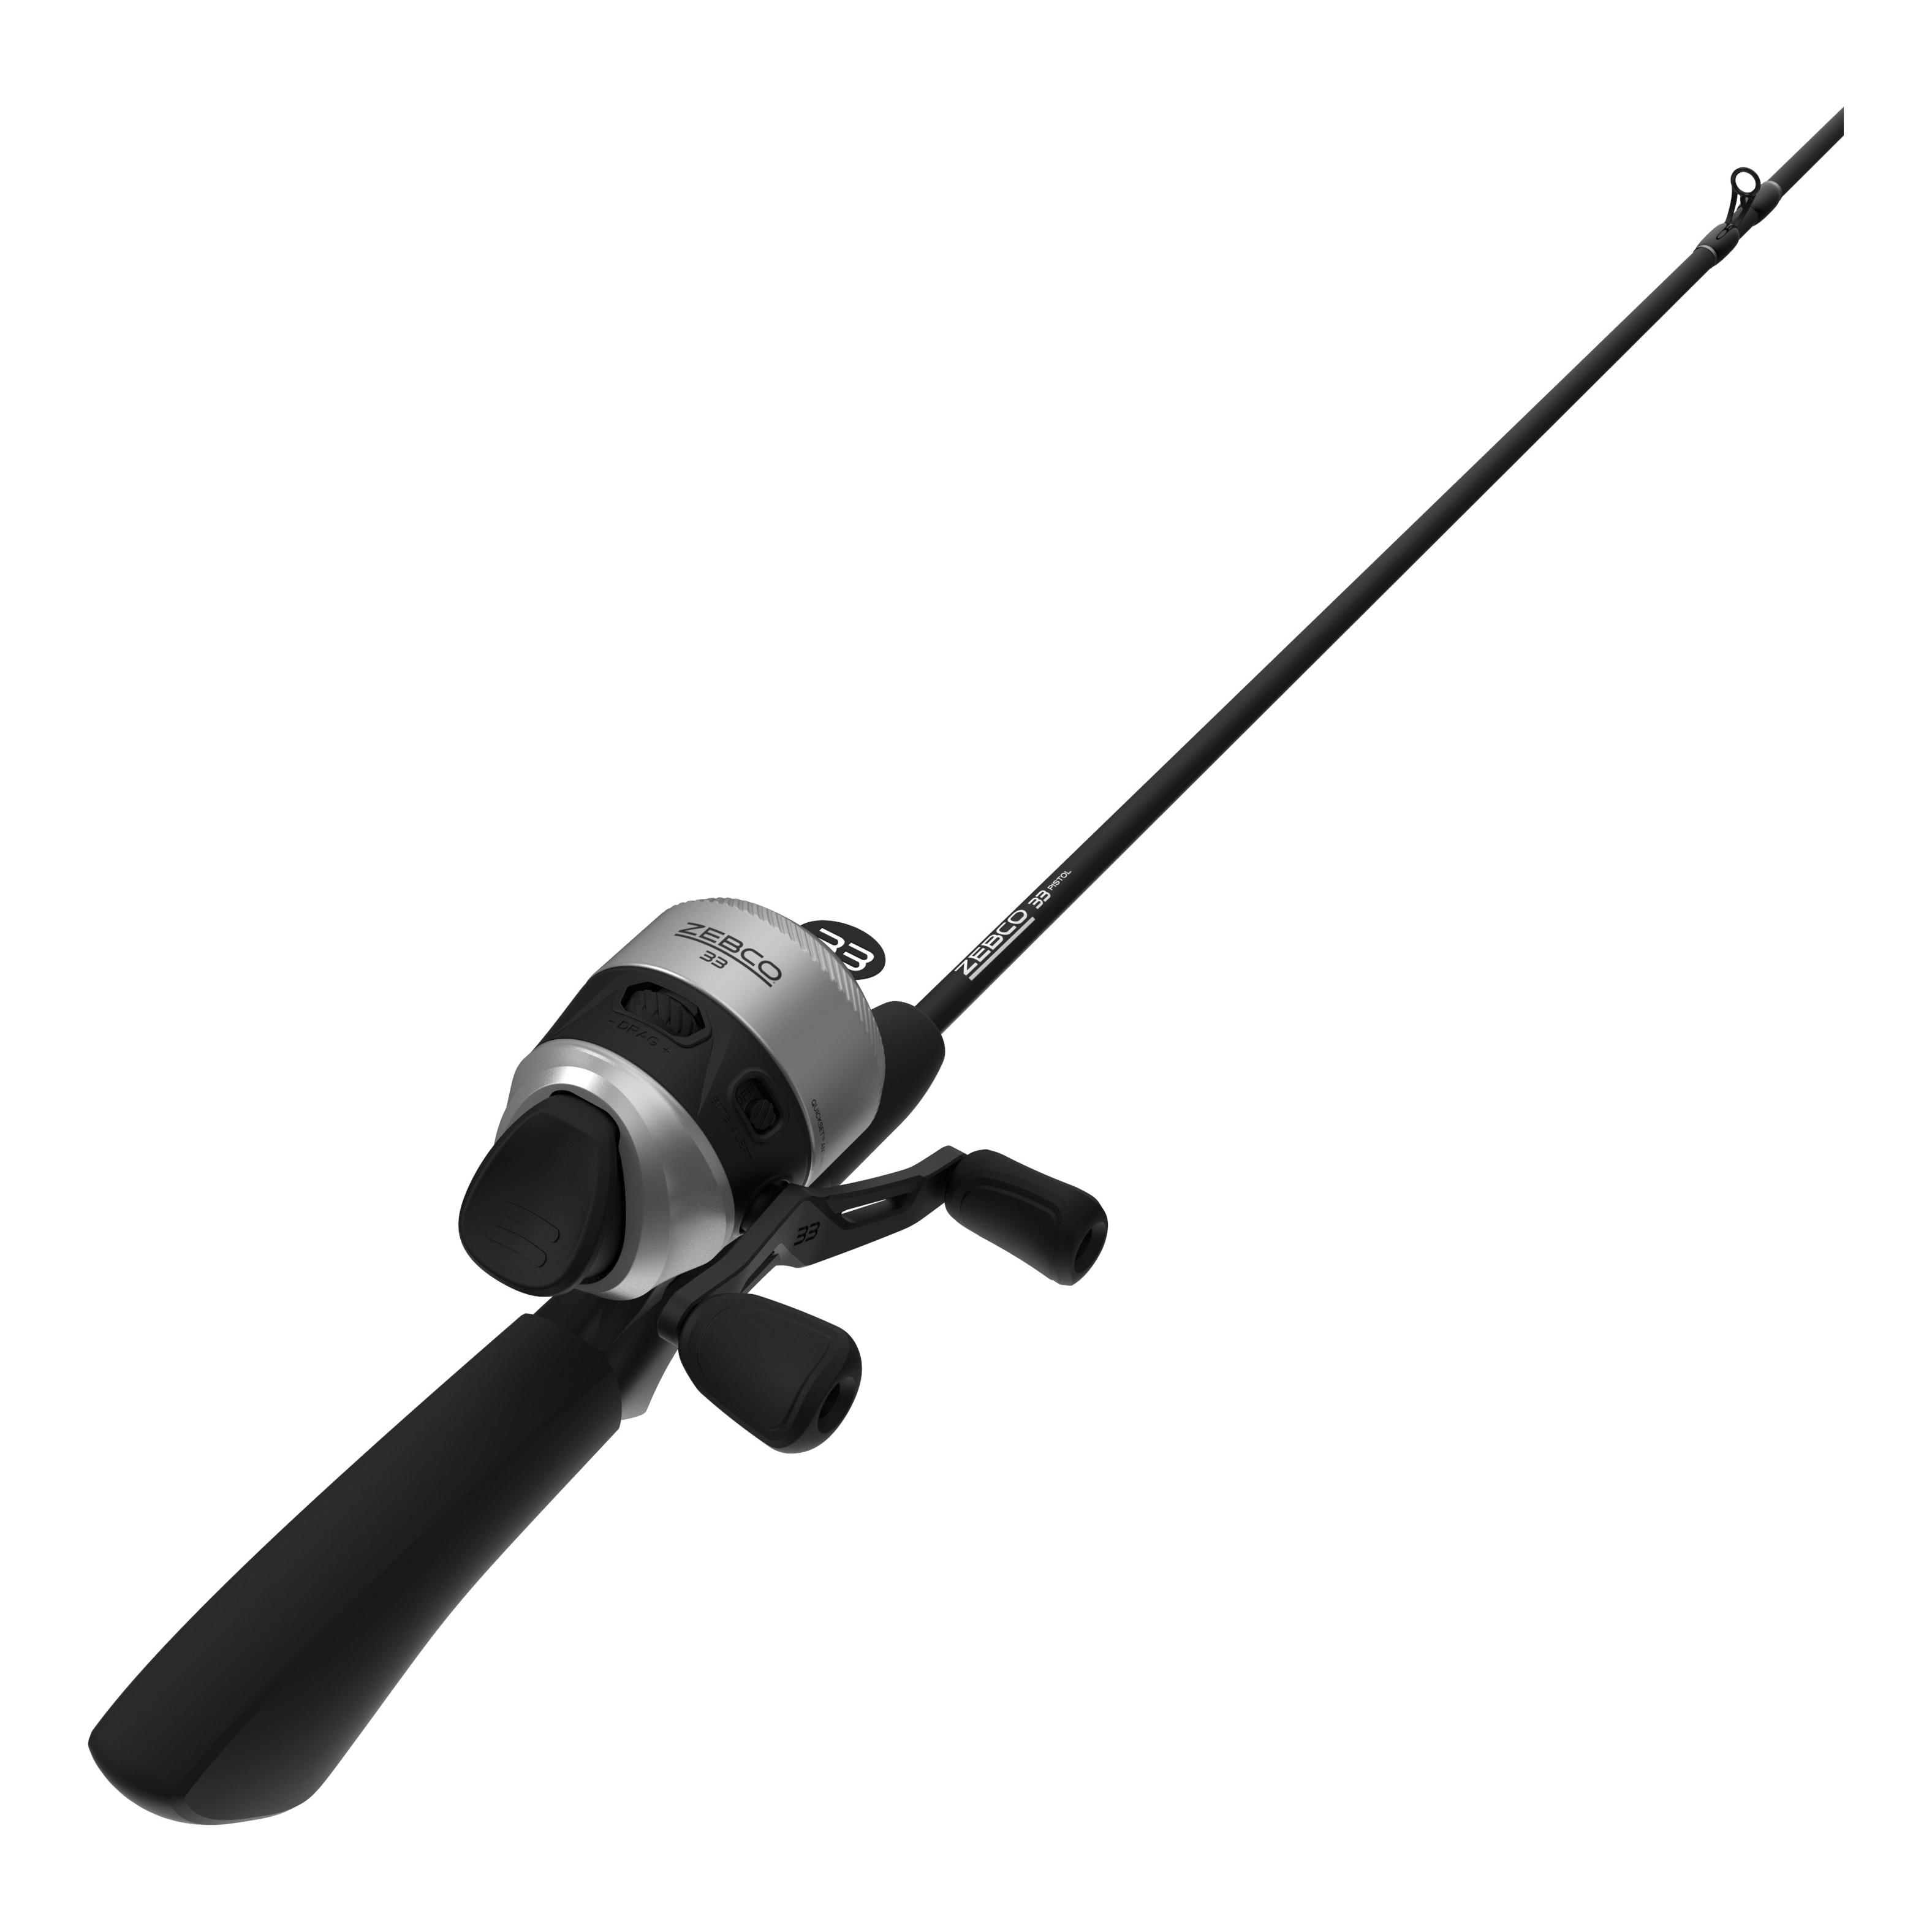 Zebco 33 Pistol Grip Spincast Combo from The Fishin' Hole